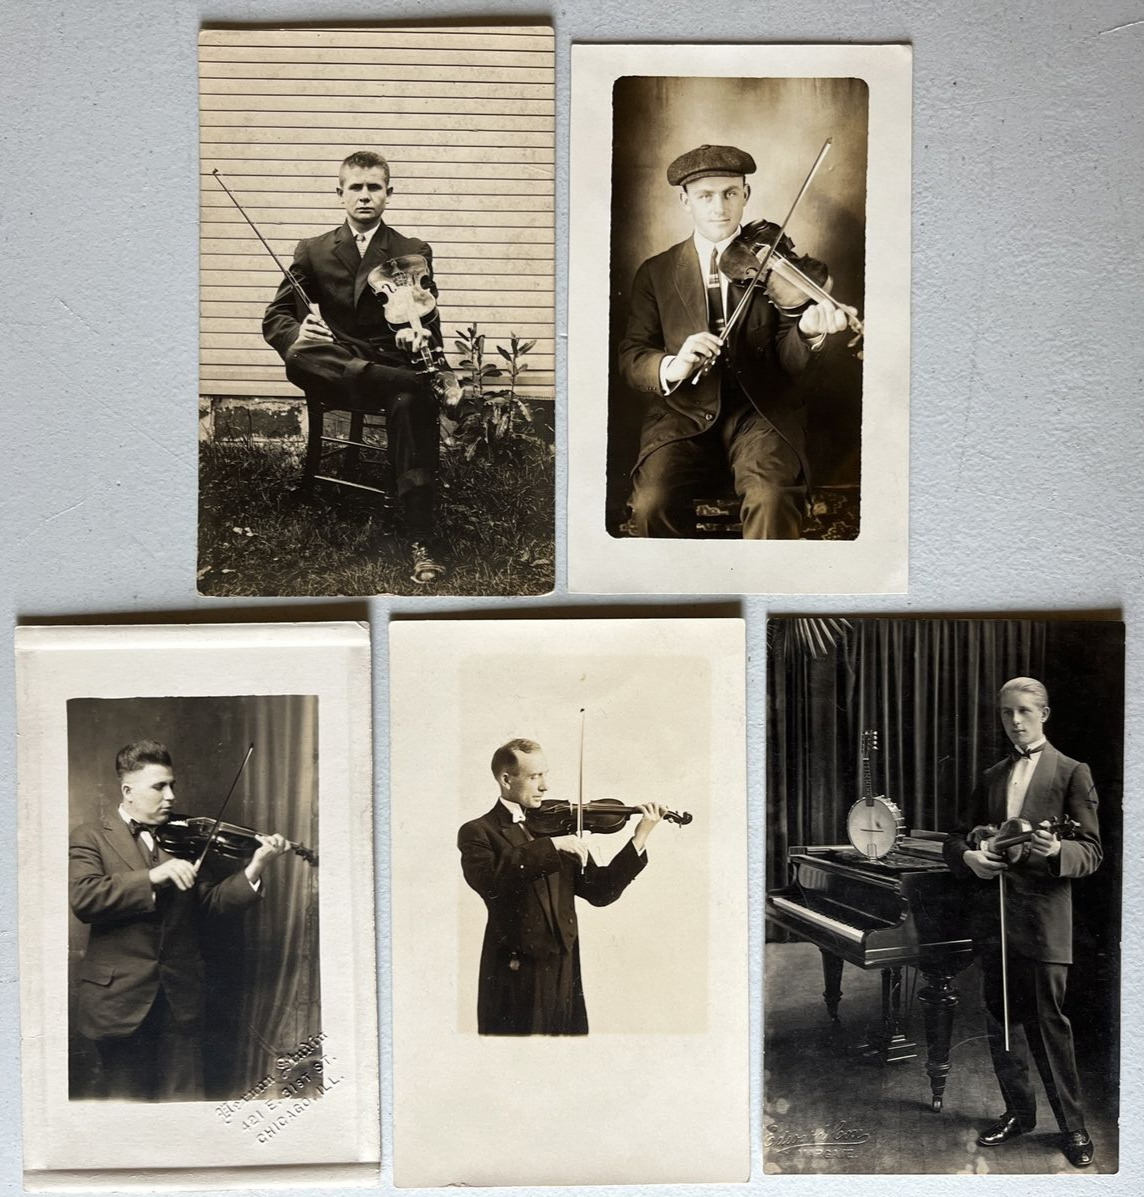 Lot of 5 Antique Real Photo Postcard RPPC Violinists Early 1900s